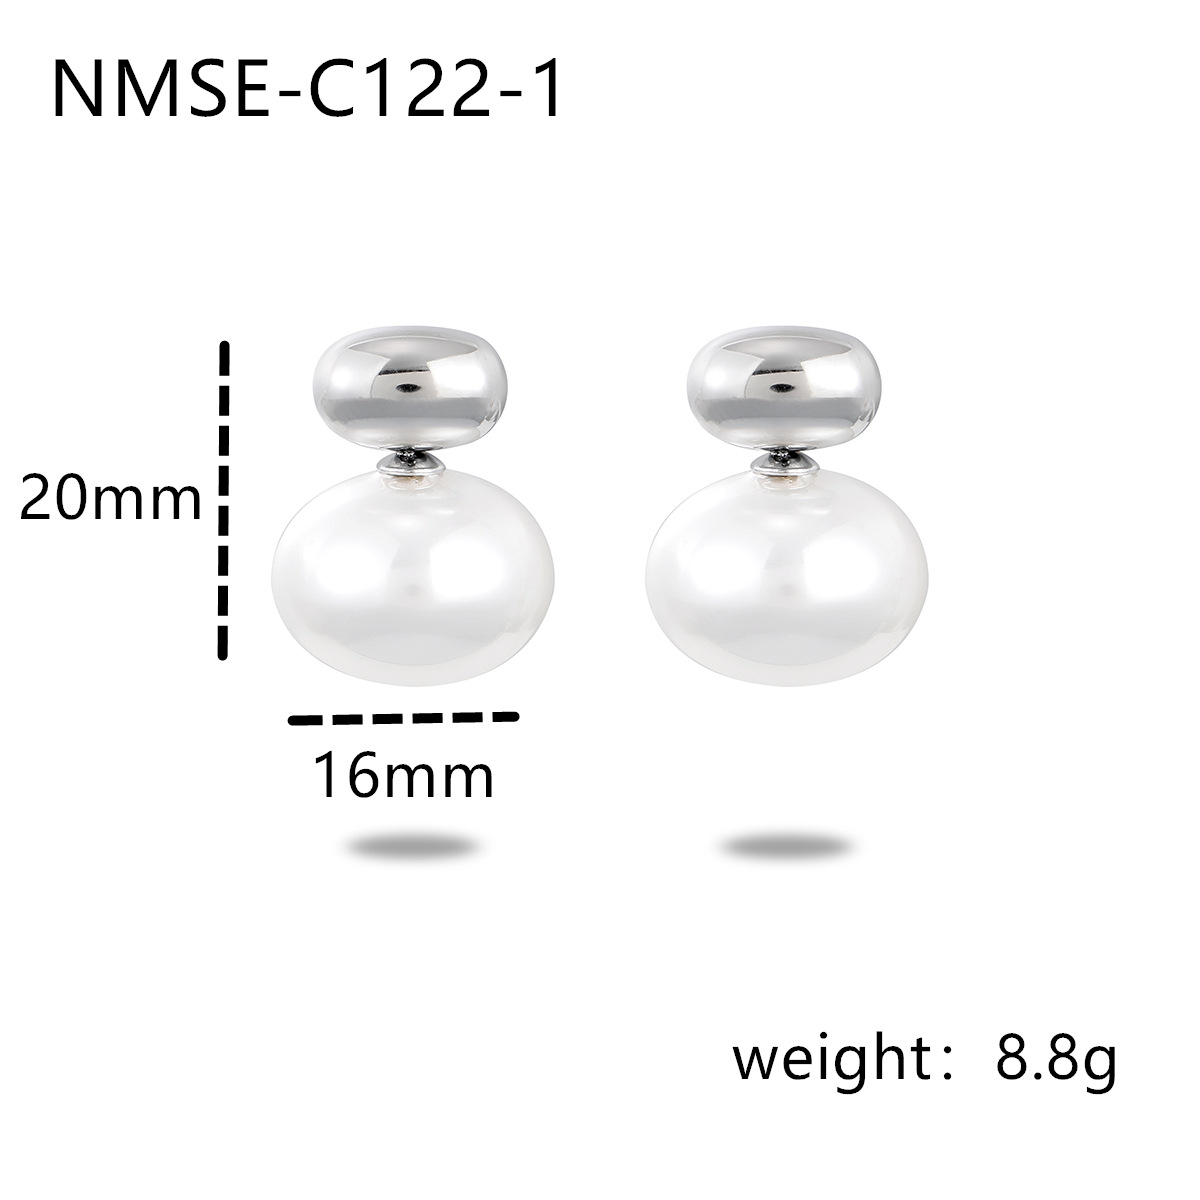 1:NMSE-C122-1